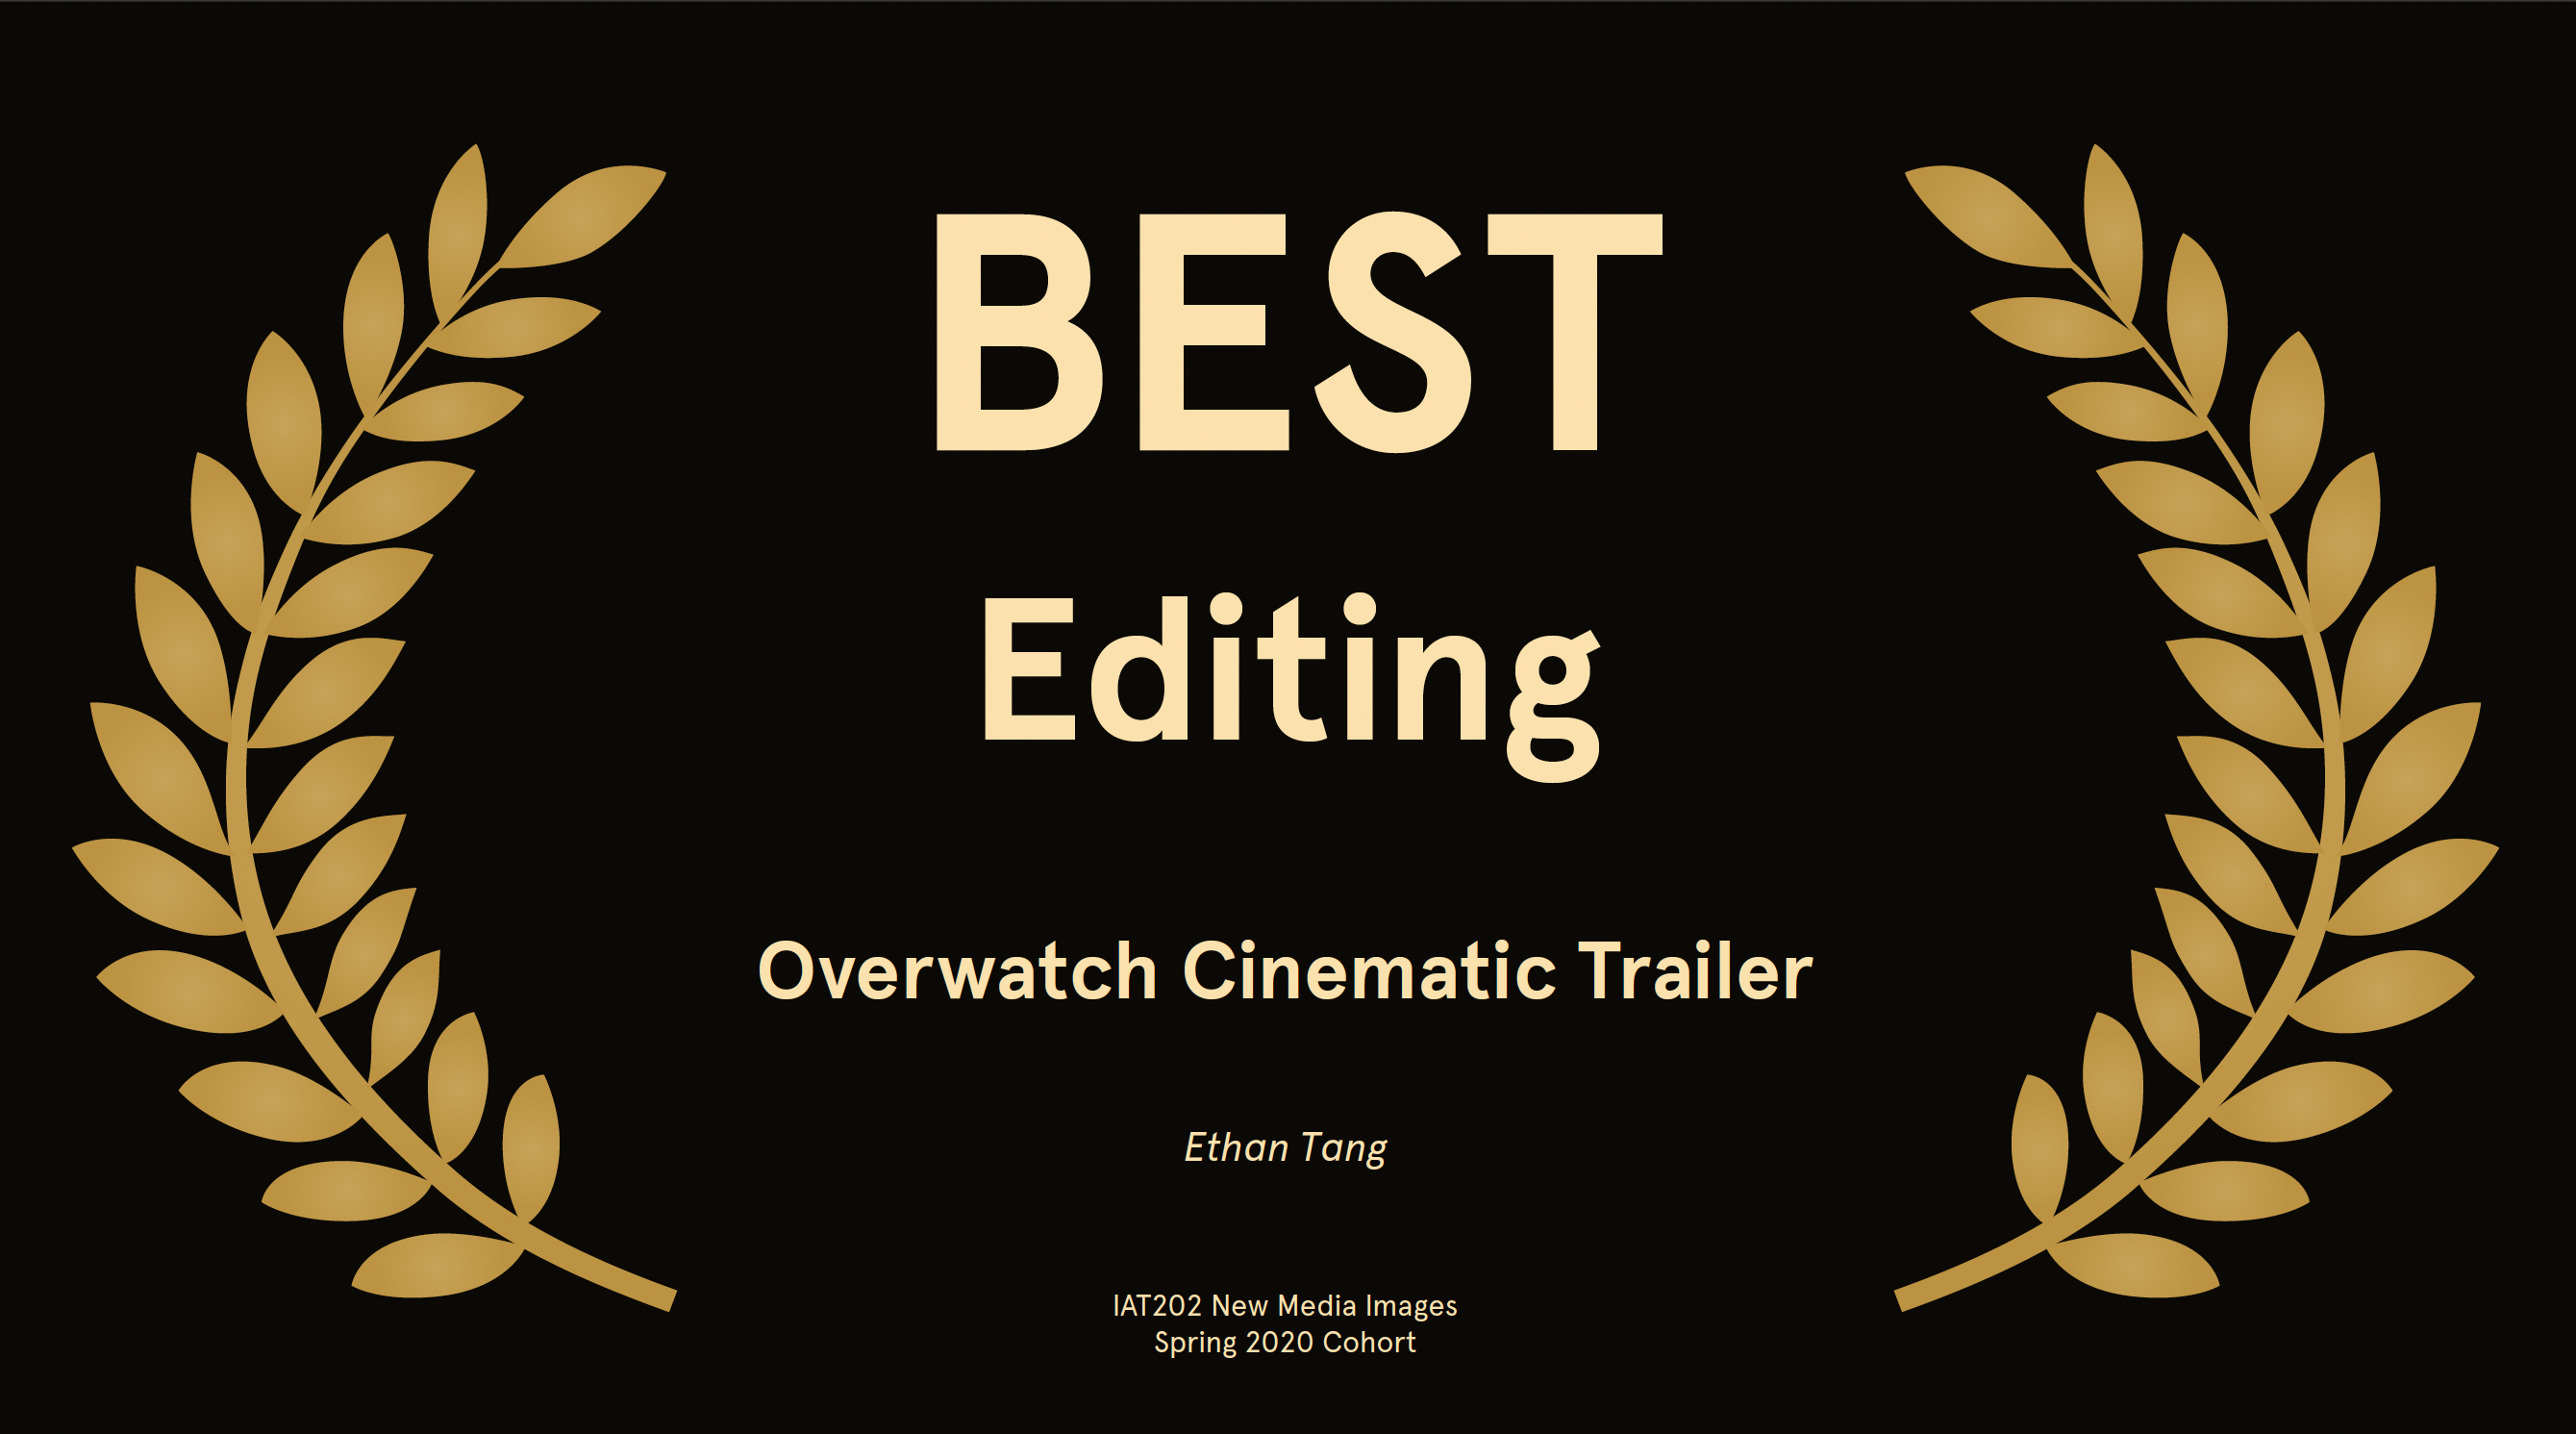 new media images IAT202 overwatch cinematic trailer best editing award